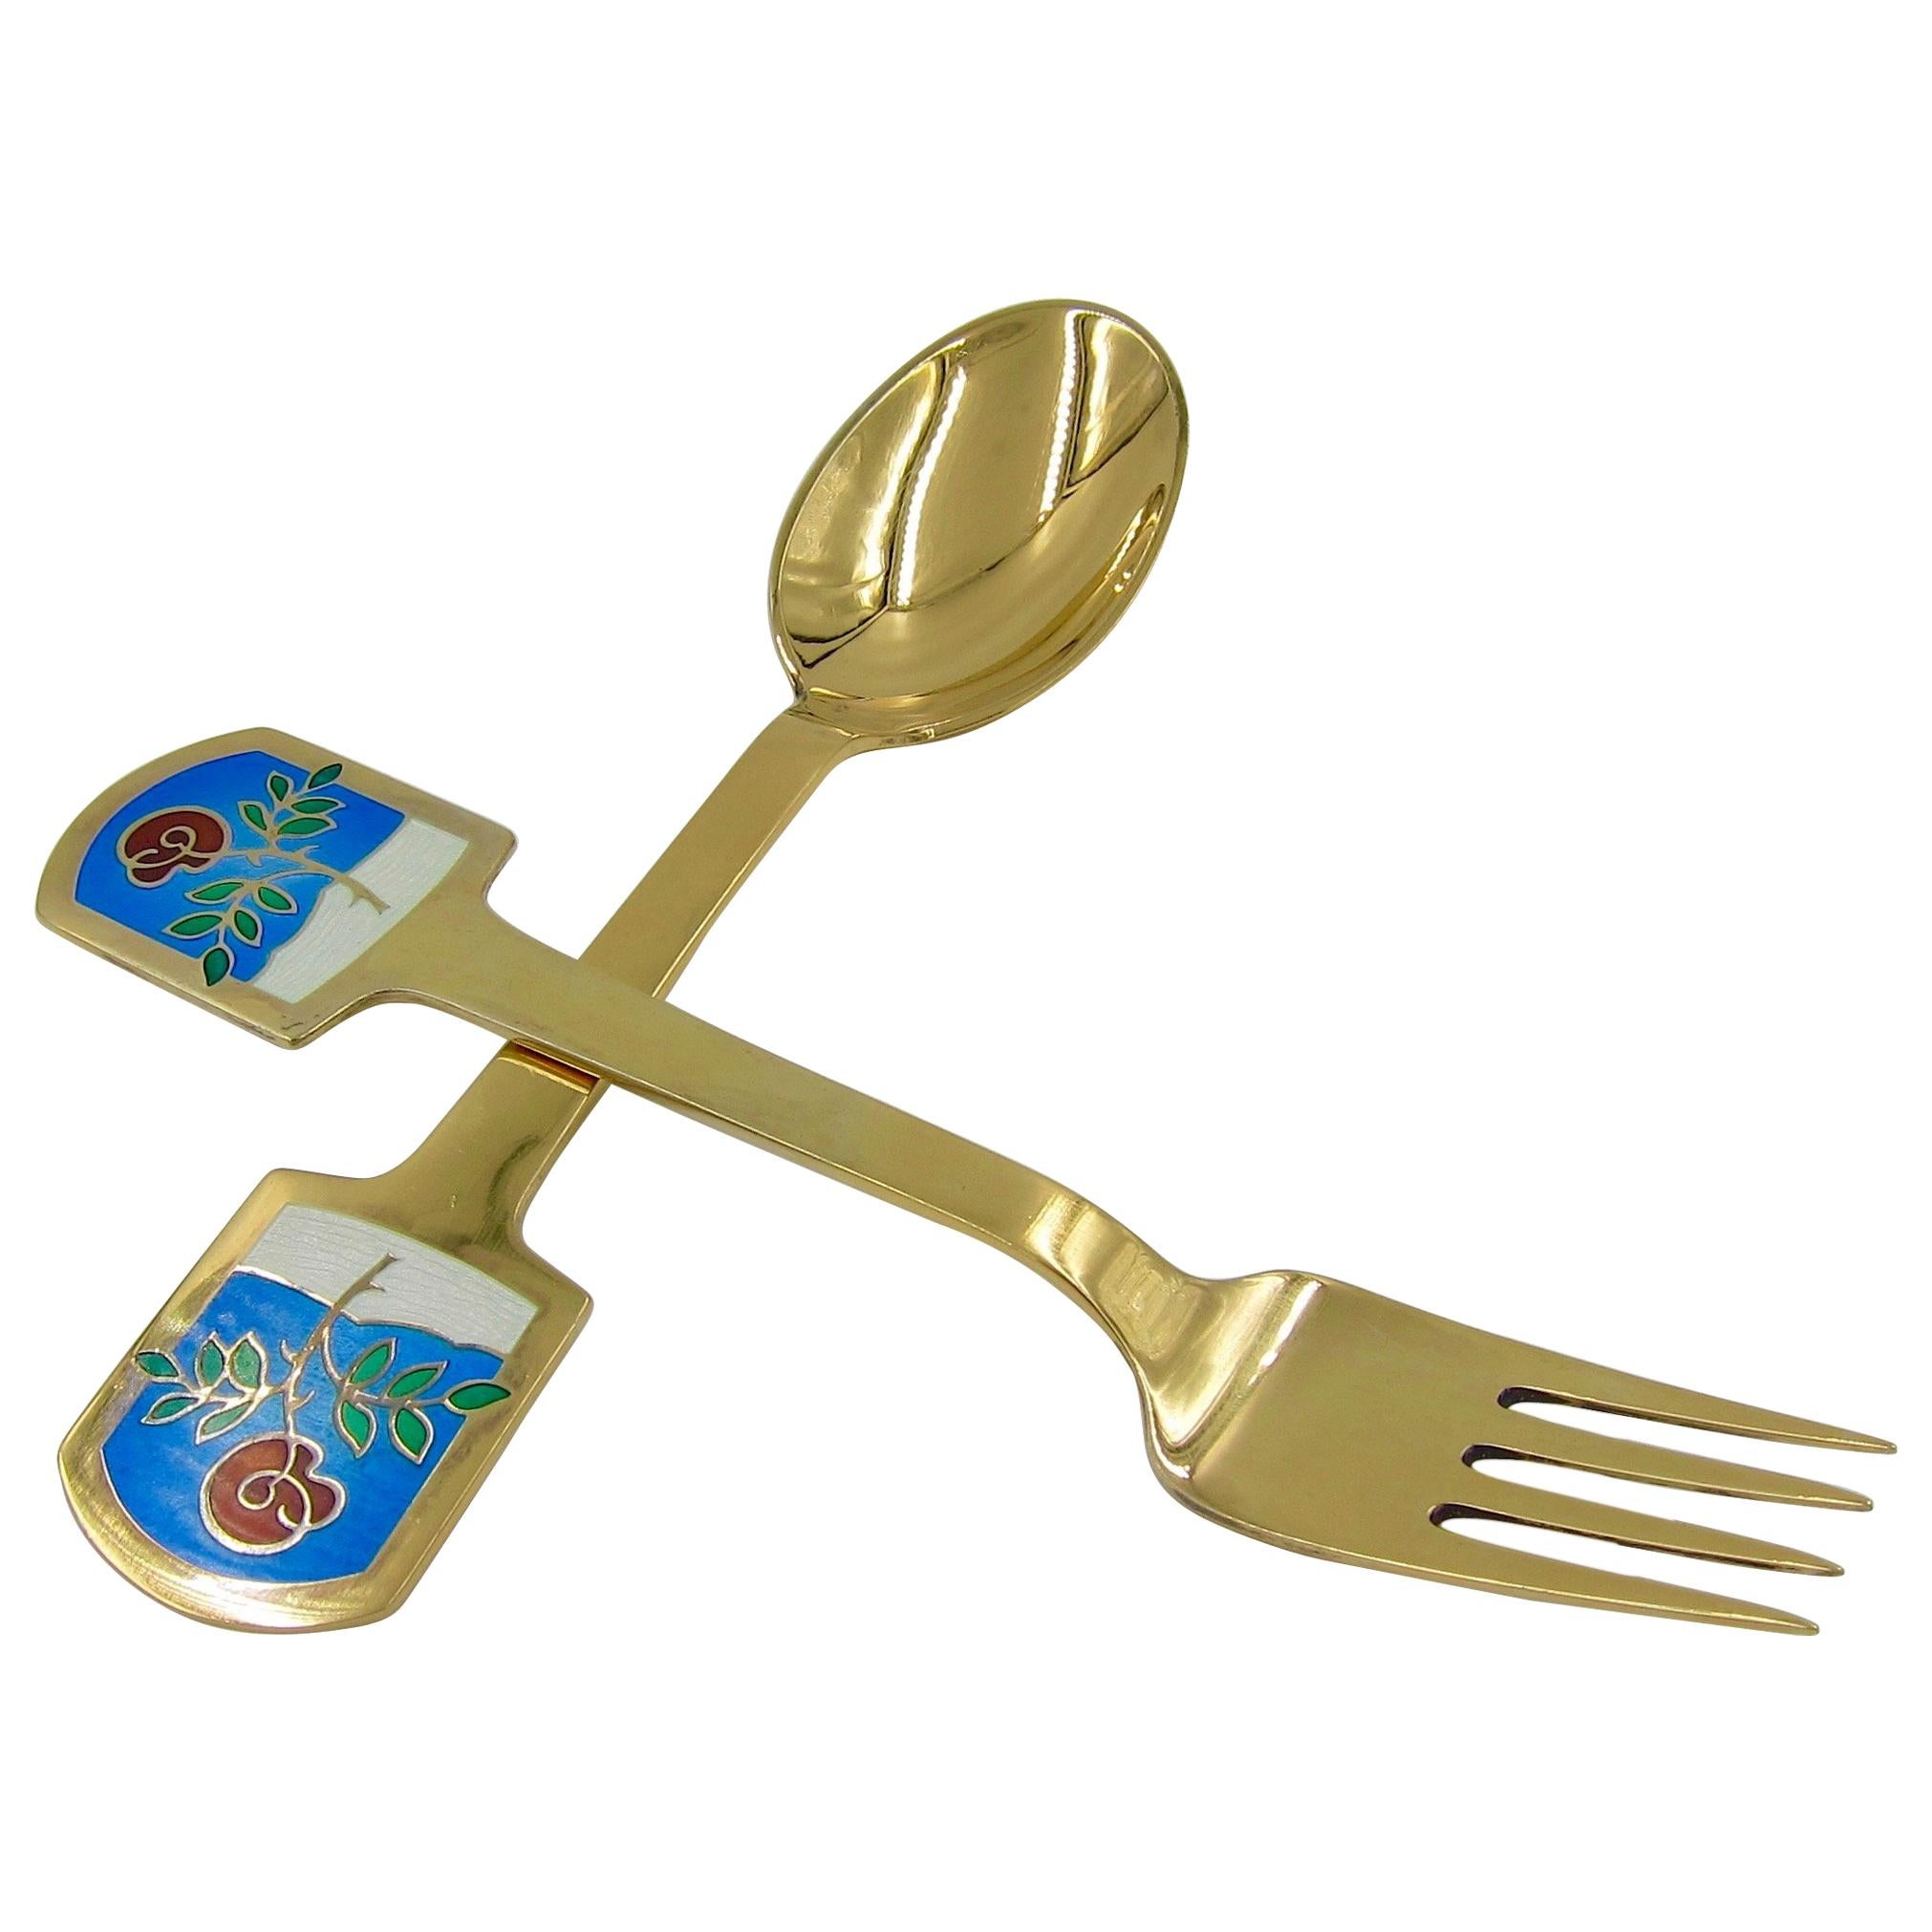 1977 Anton Michelsen Gilt Silver and Enamel Christmas Fork and Spoon Set